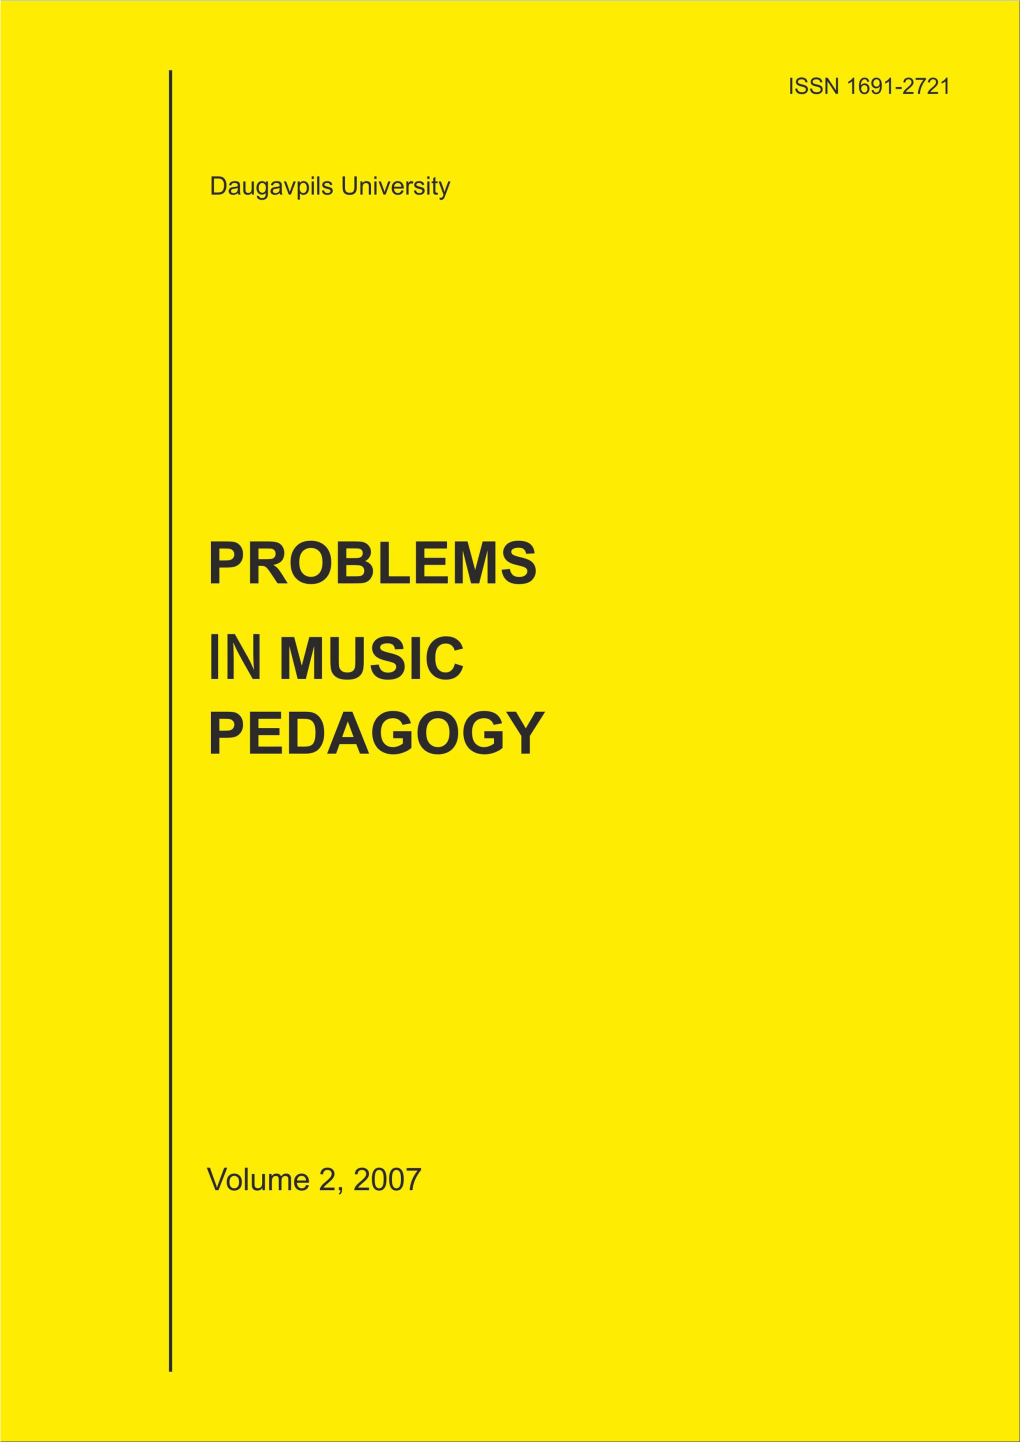 Problems in Music Pedagogy